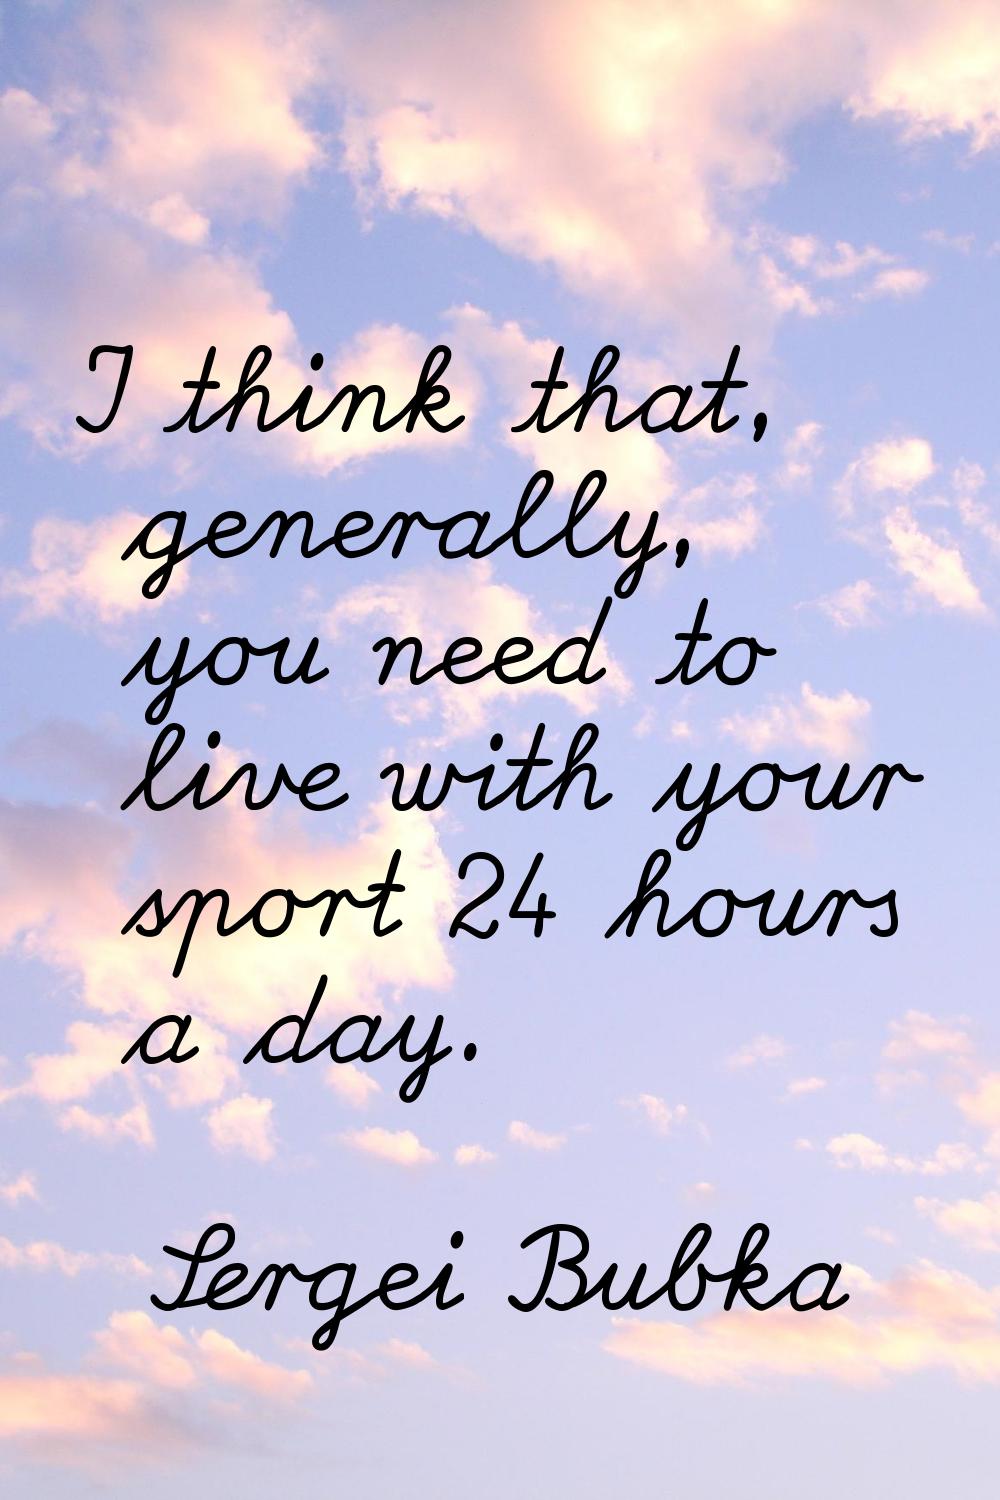 I think that, generally, you need to live with your sport 24 hours a day.